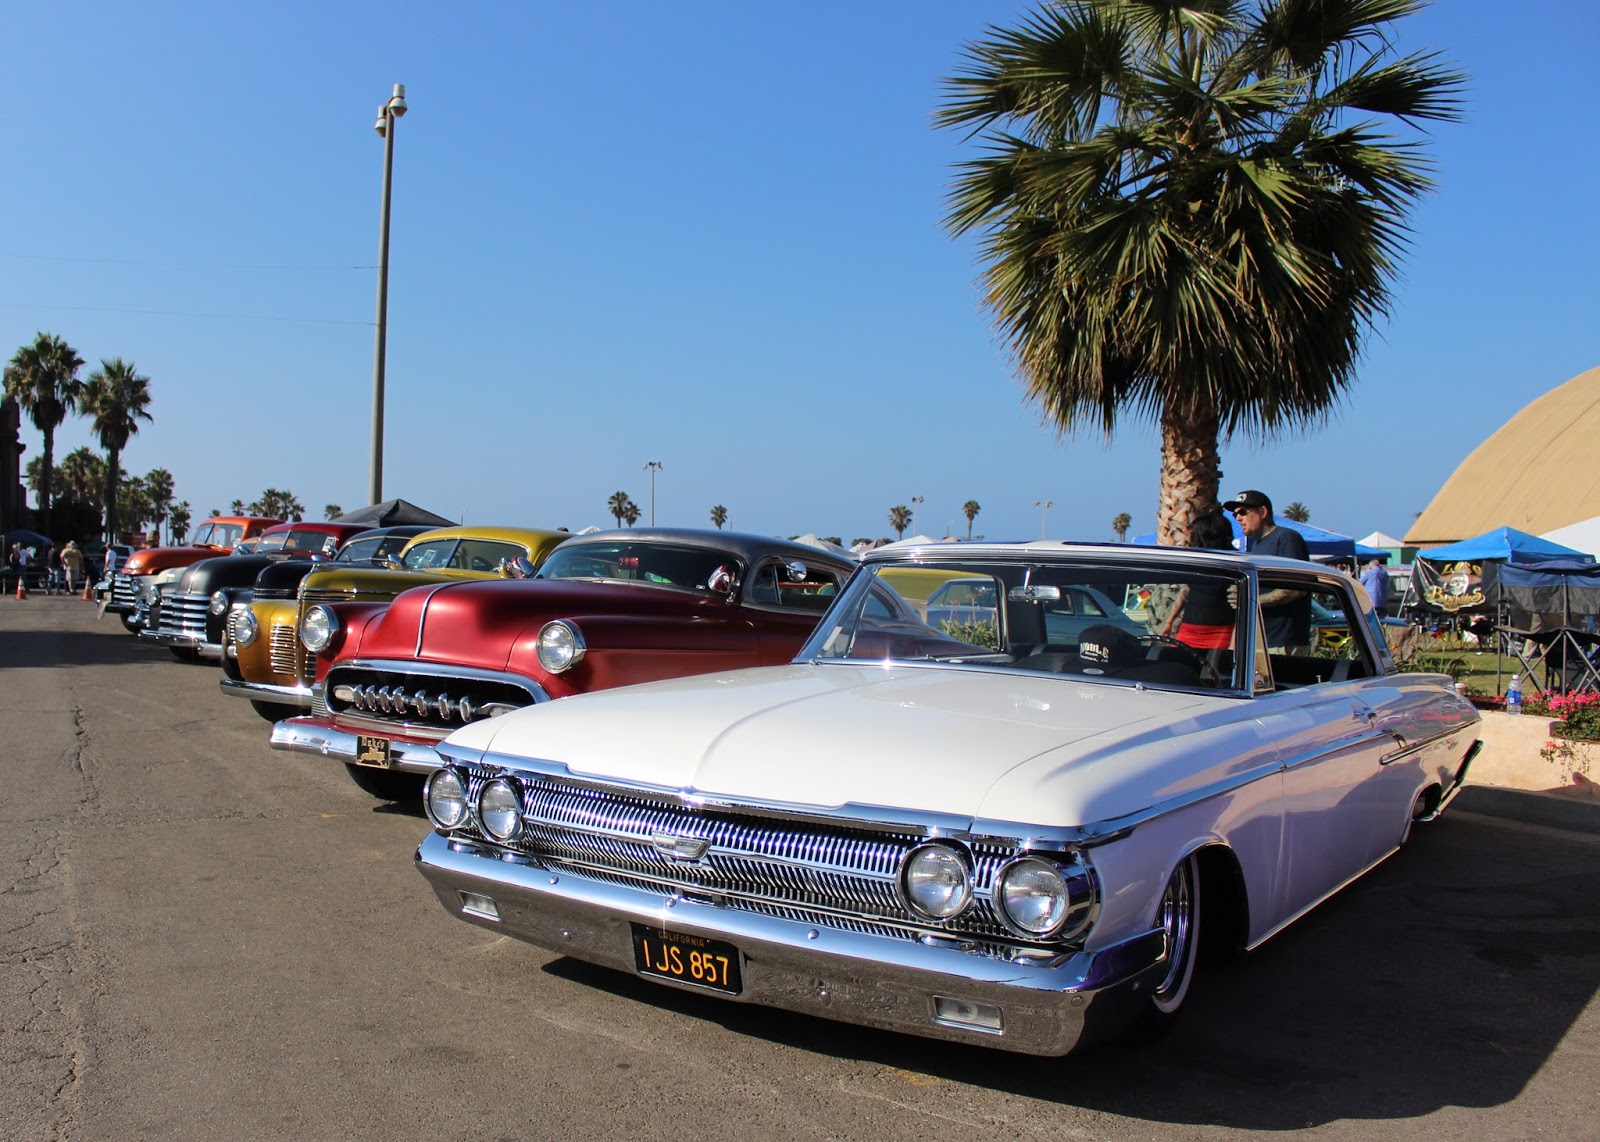 Covering Classic Cars 13th Annual Ventura Nationals Labor Day focus for Classic Cars Ventura